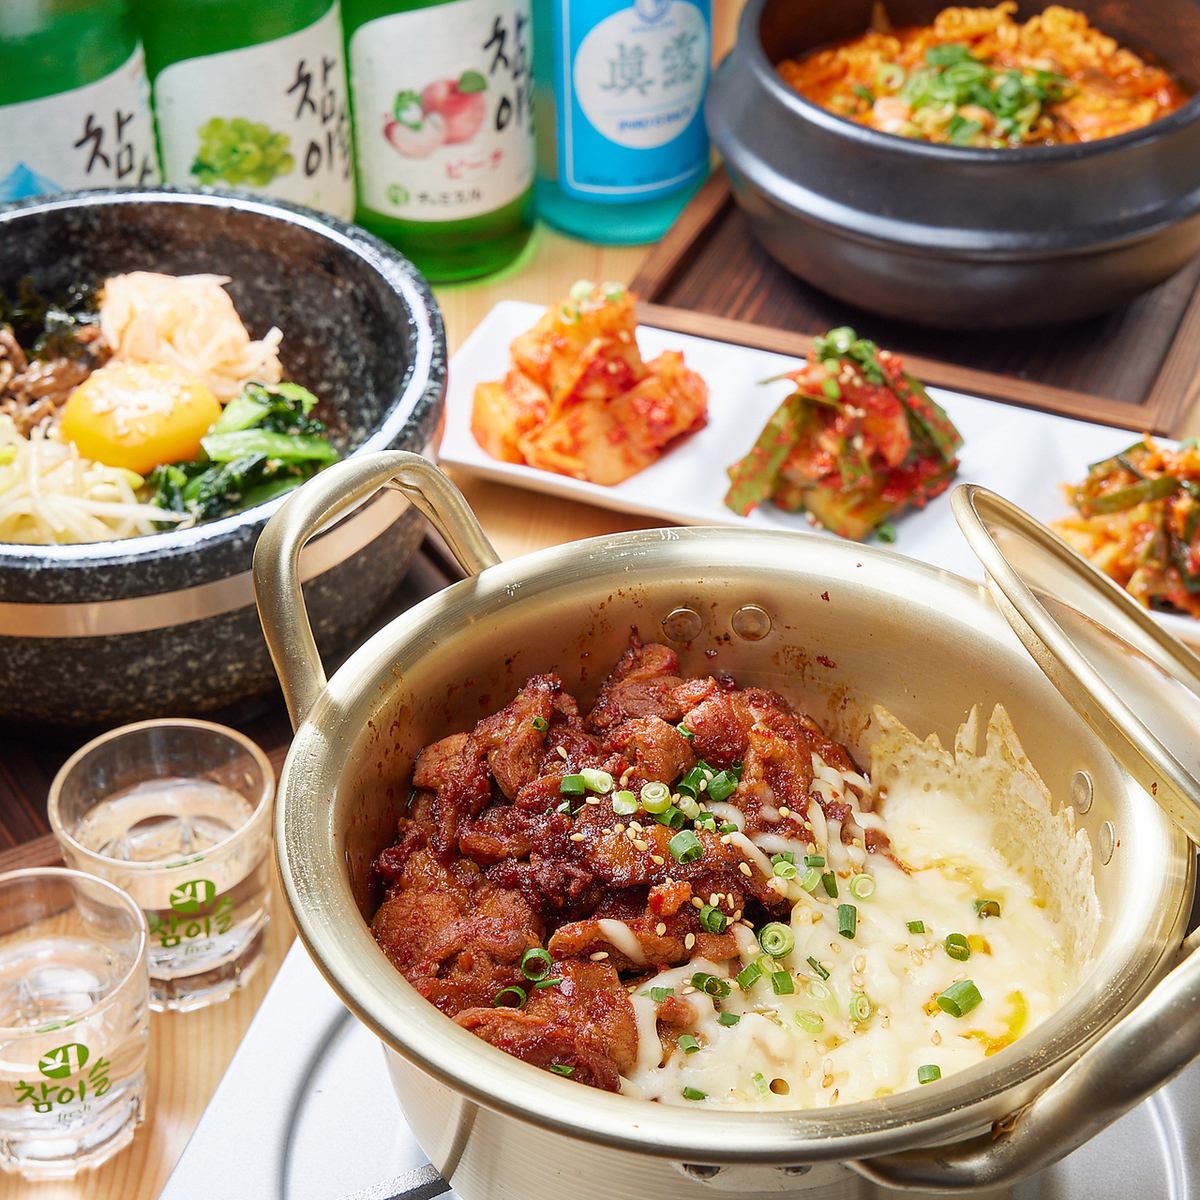 Full of volume! Satisfy your taste buds with creative Korean cuisine created by a former sushi chef from Korea that you can't taste anywhere else